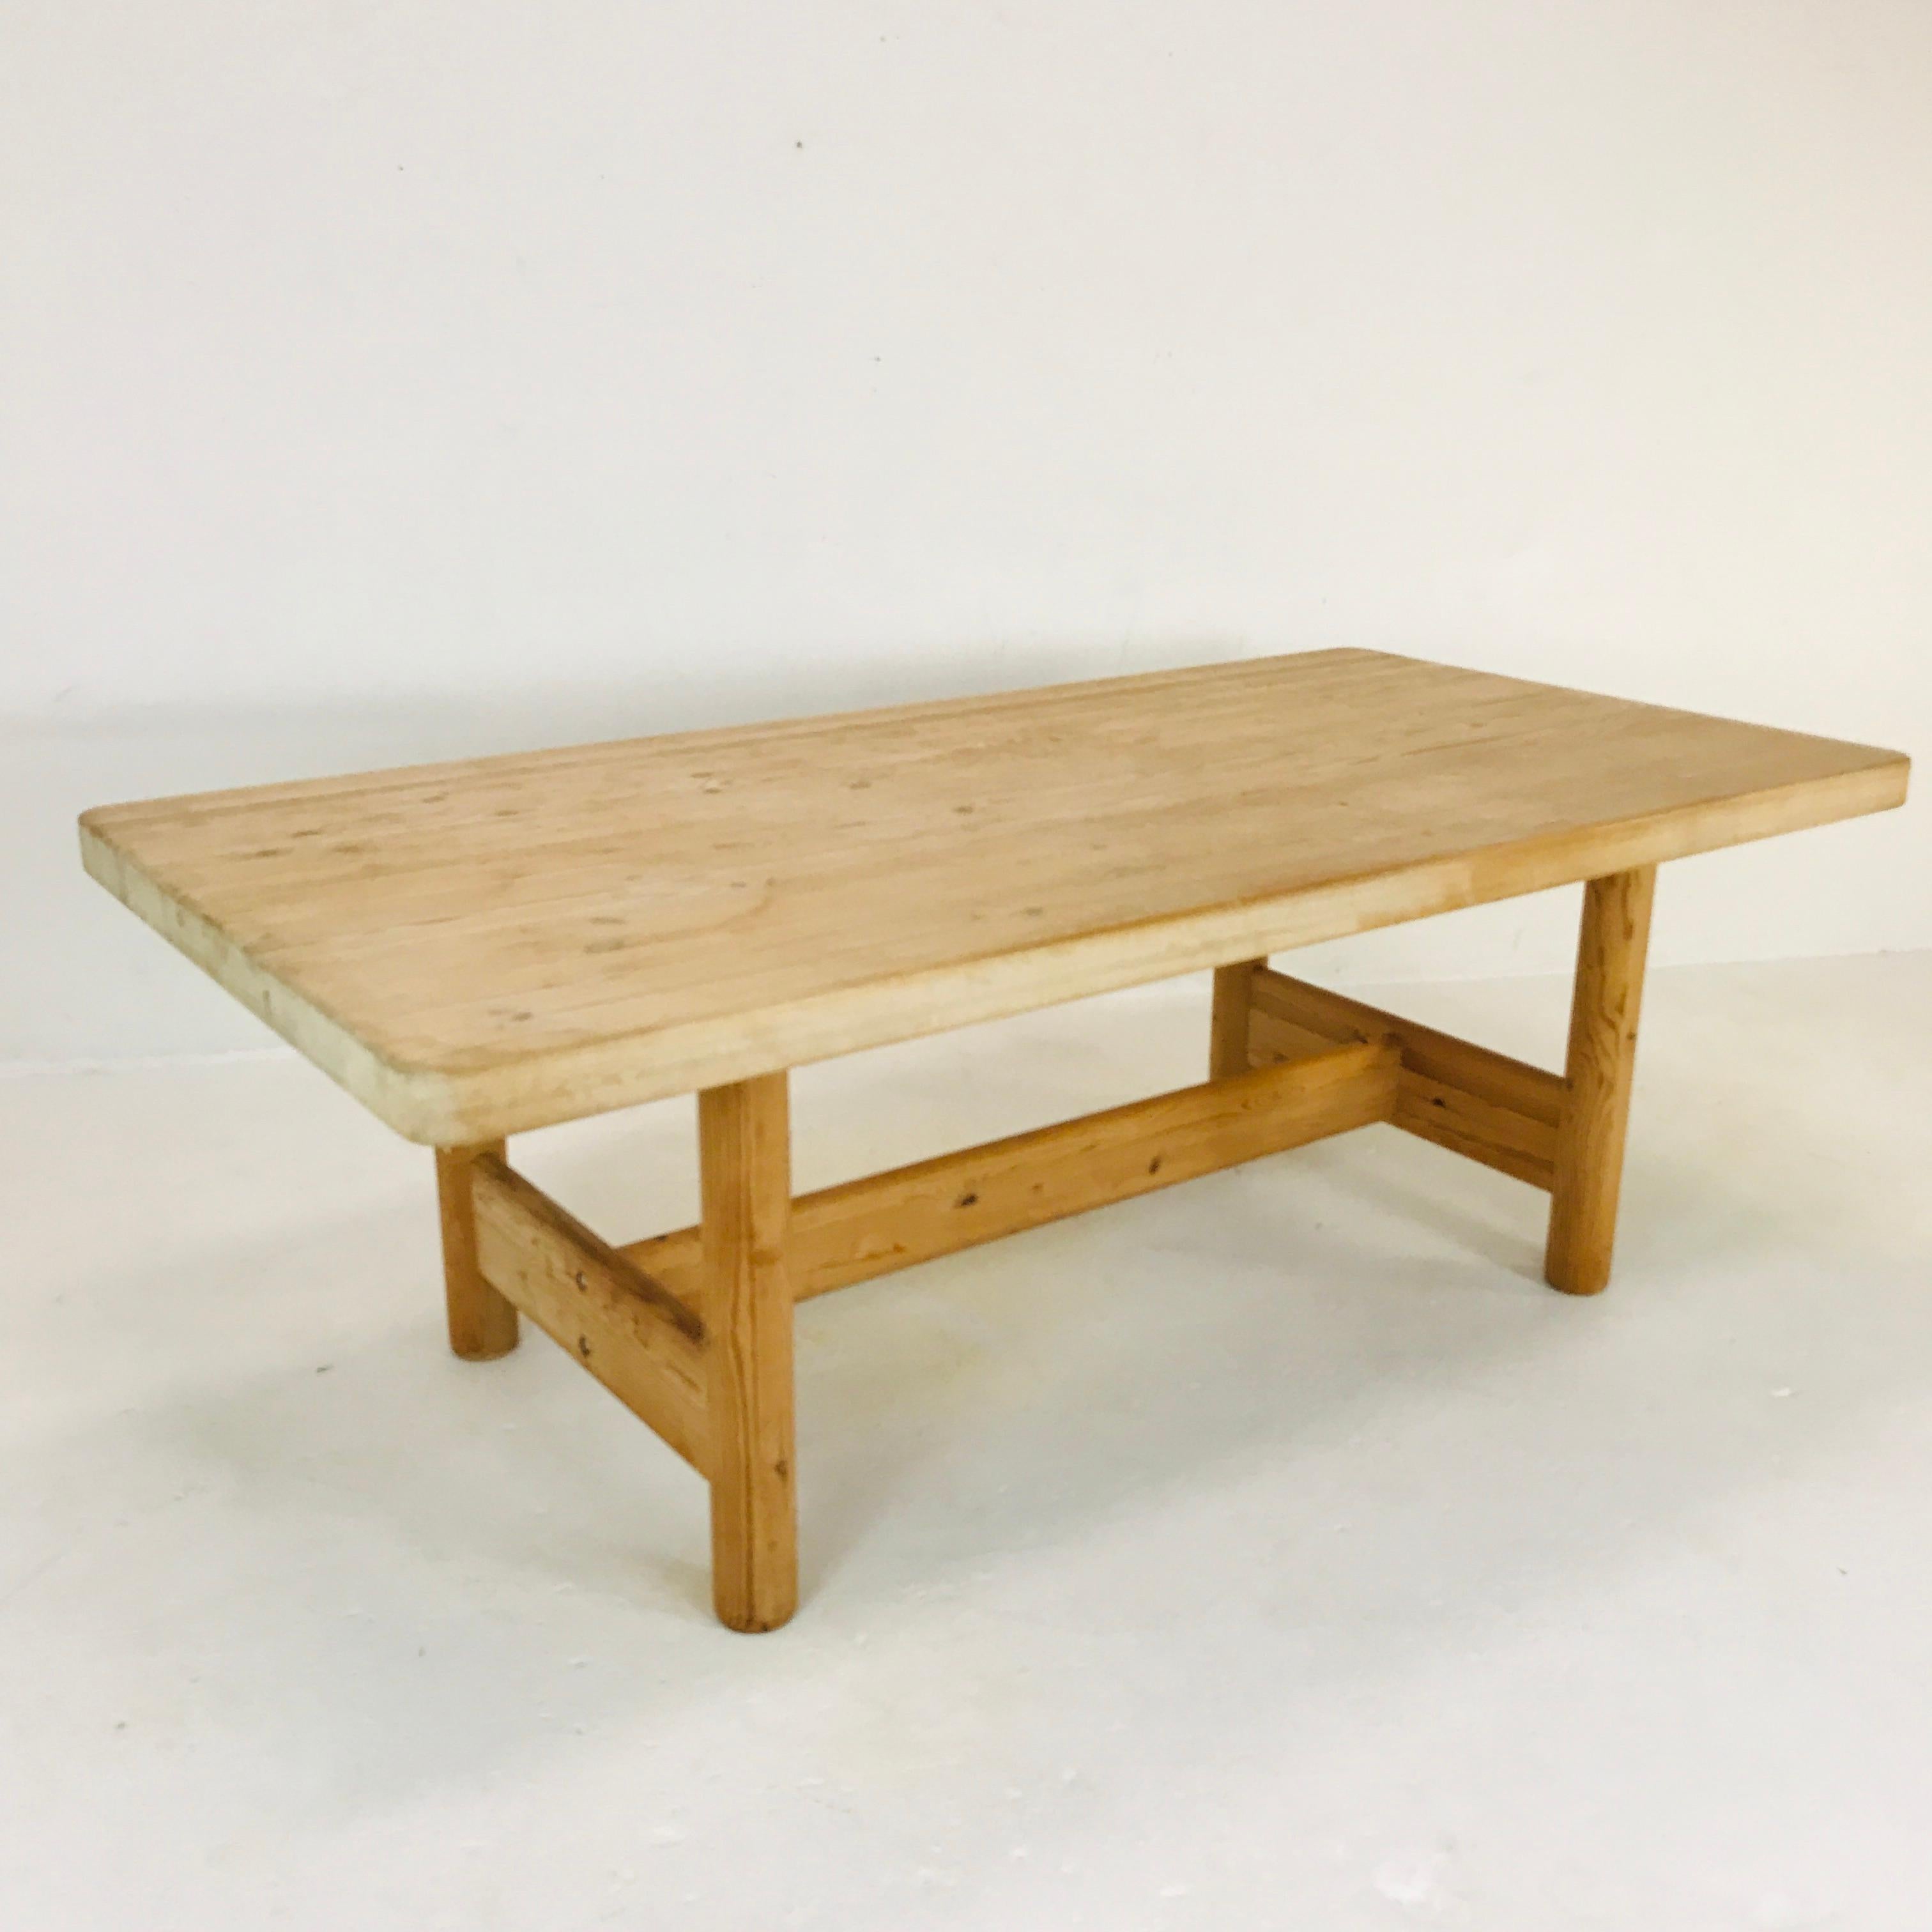 Thick and Heavy solid Scandinavian pine butcher block dining table. Imported to the United States by the original owner in the 1970s. Original natural wood finish - refinishing recommended (tabletop includes some visible scratches and watermarks).